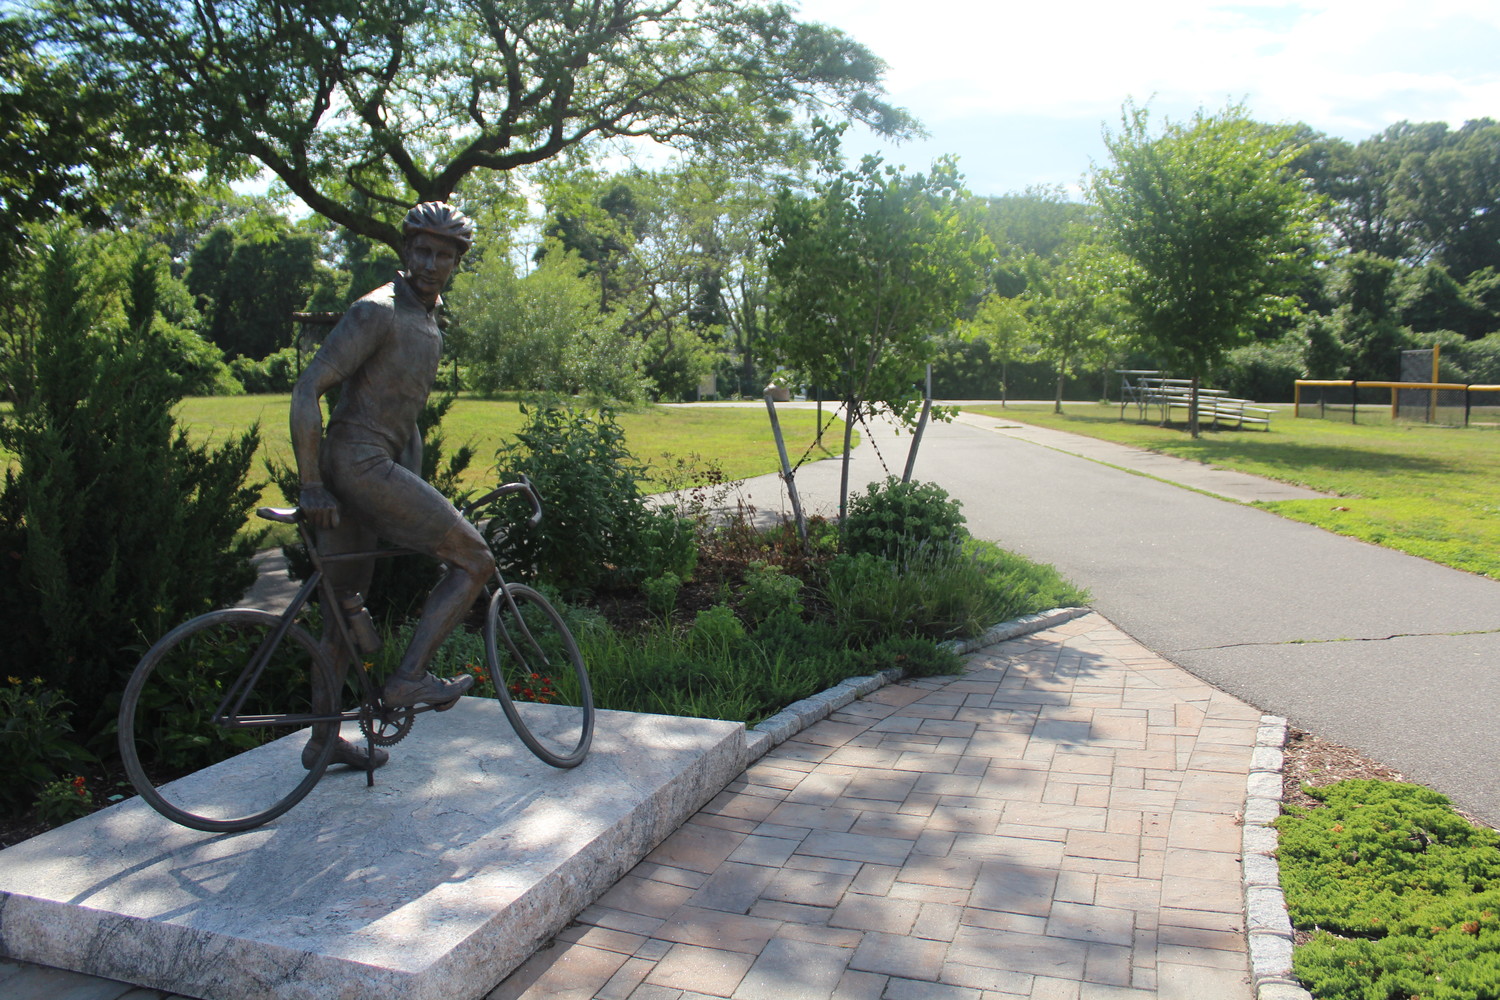 A statue of Matt Scarpati, who was struck and killed on the Jones Beach bike path in 2009, at Cedar Creek Park in Seaford, where the Miles for Matt bicycle marathons take place every year.